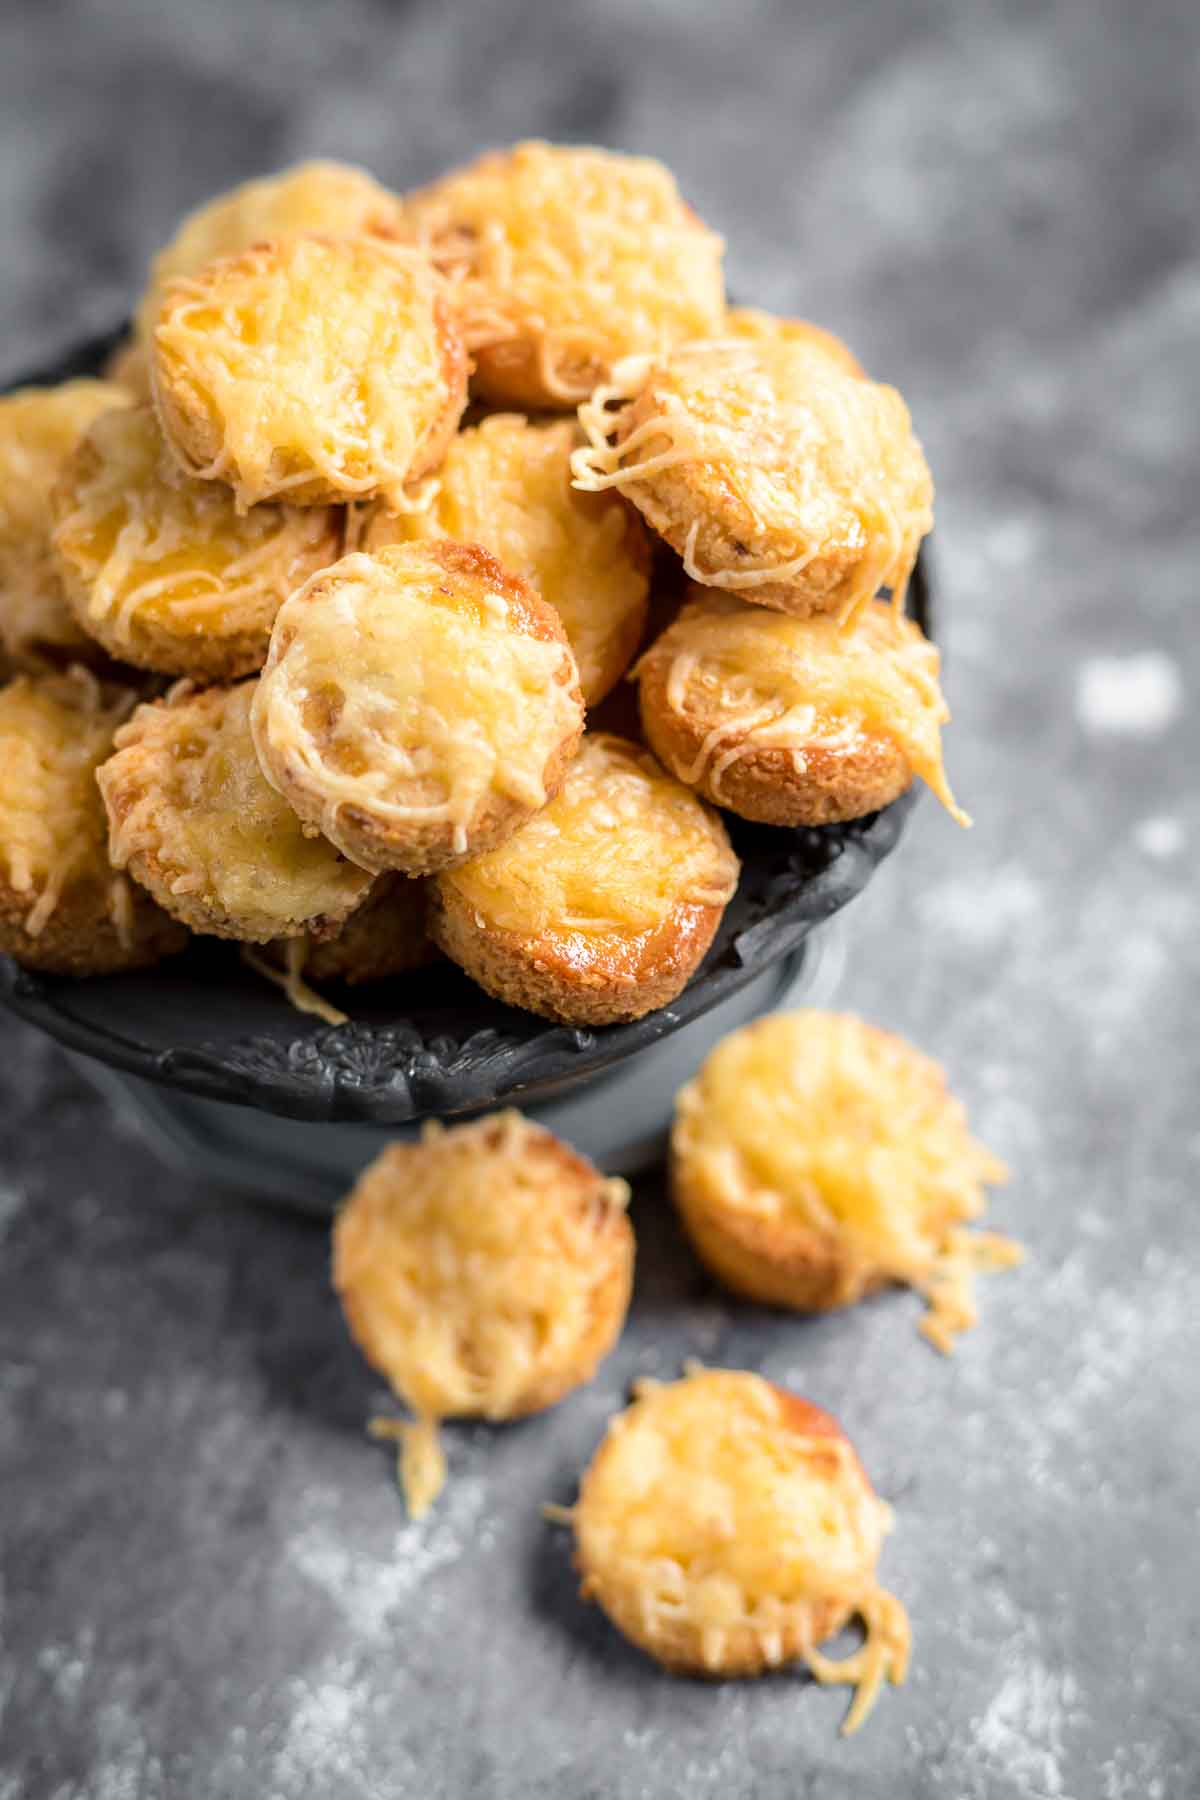 Keto Biscuit Bites with baked cheese on top.